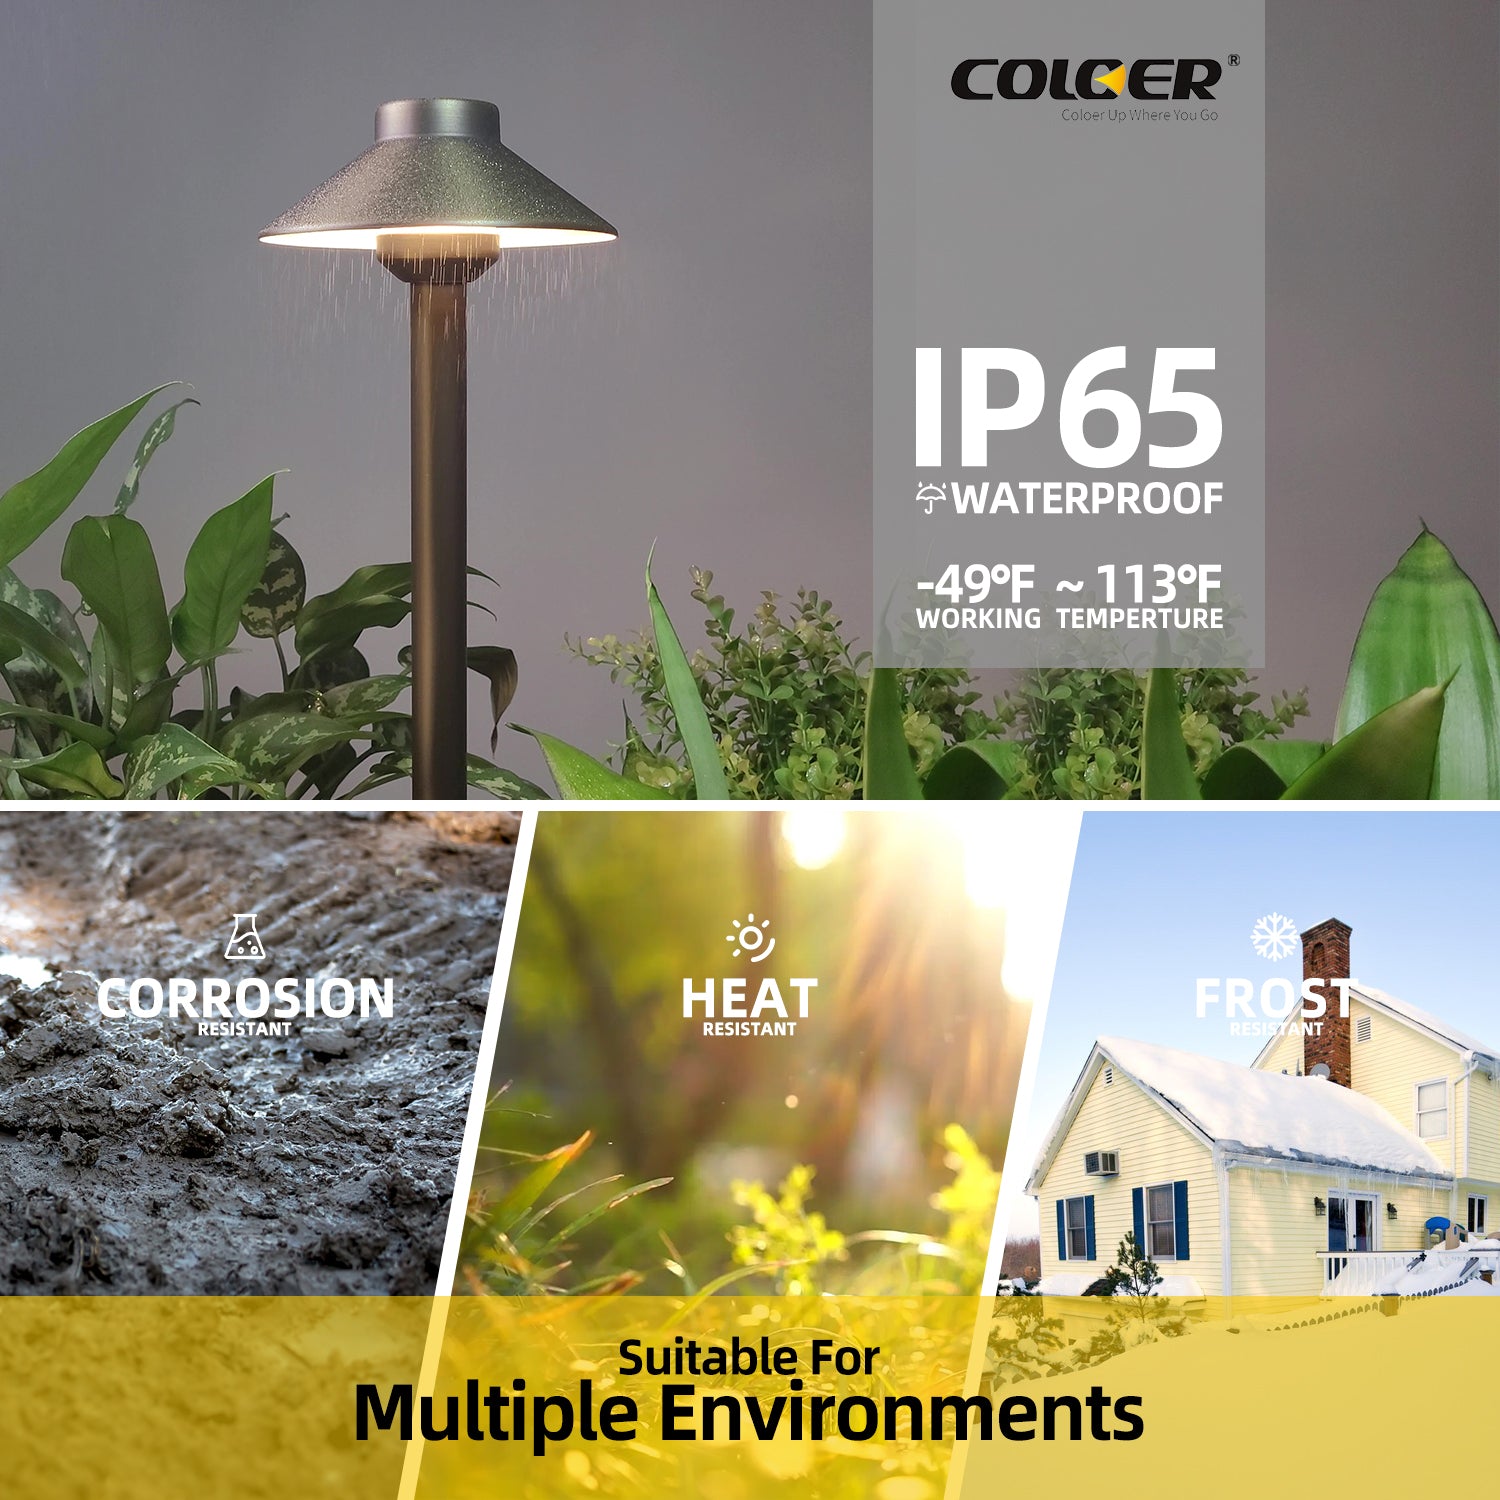 12V low voltage brass garden path light by COLOER with IP65 waterproof rating, suitable for multiple environments including corrosion, heat, and frost resistance